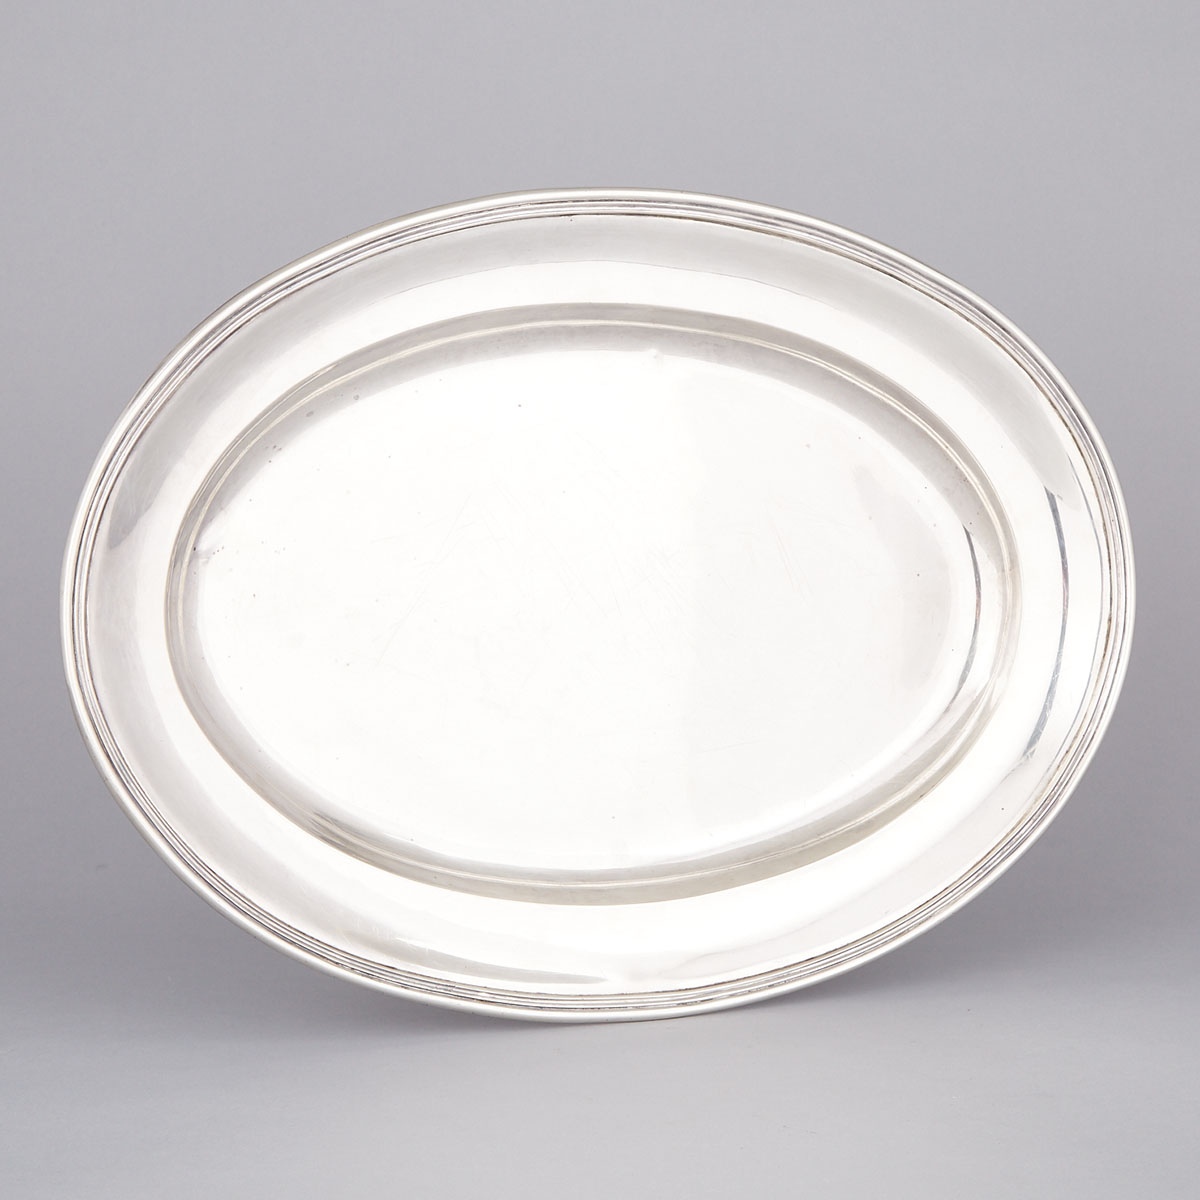 Canadian Silver Oval Platter, Henry Birks & Sons, Montreal, Que., 1943